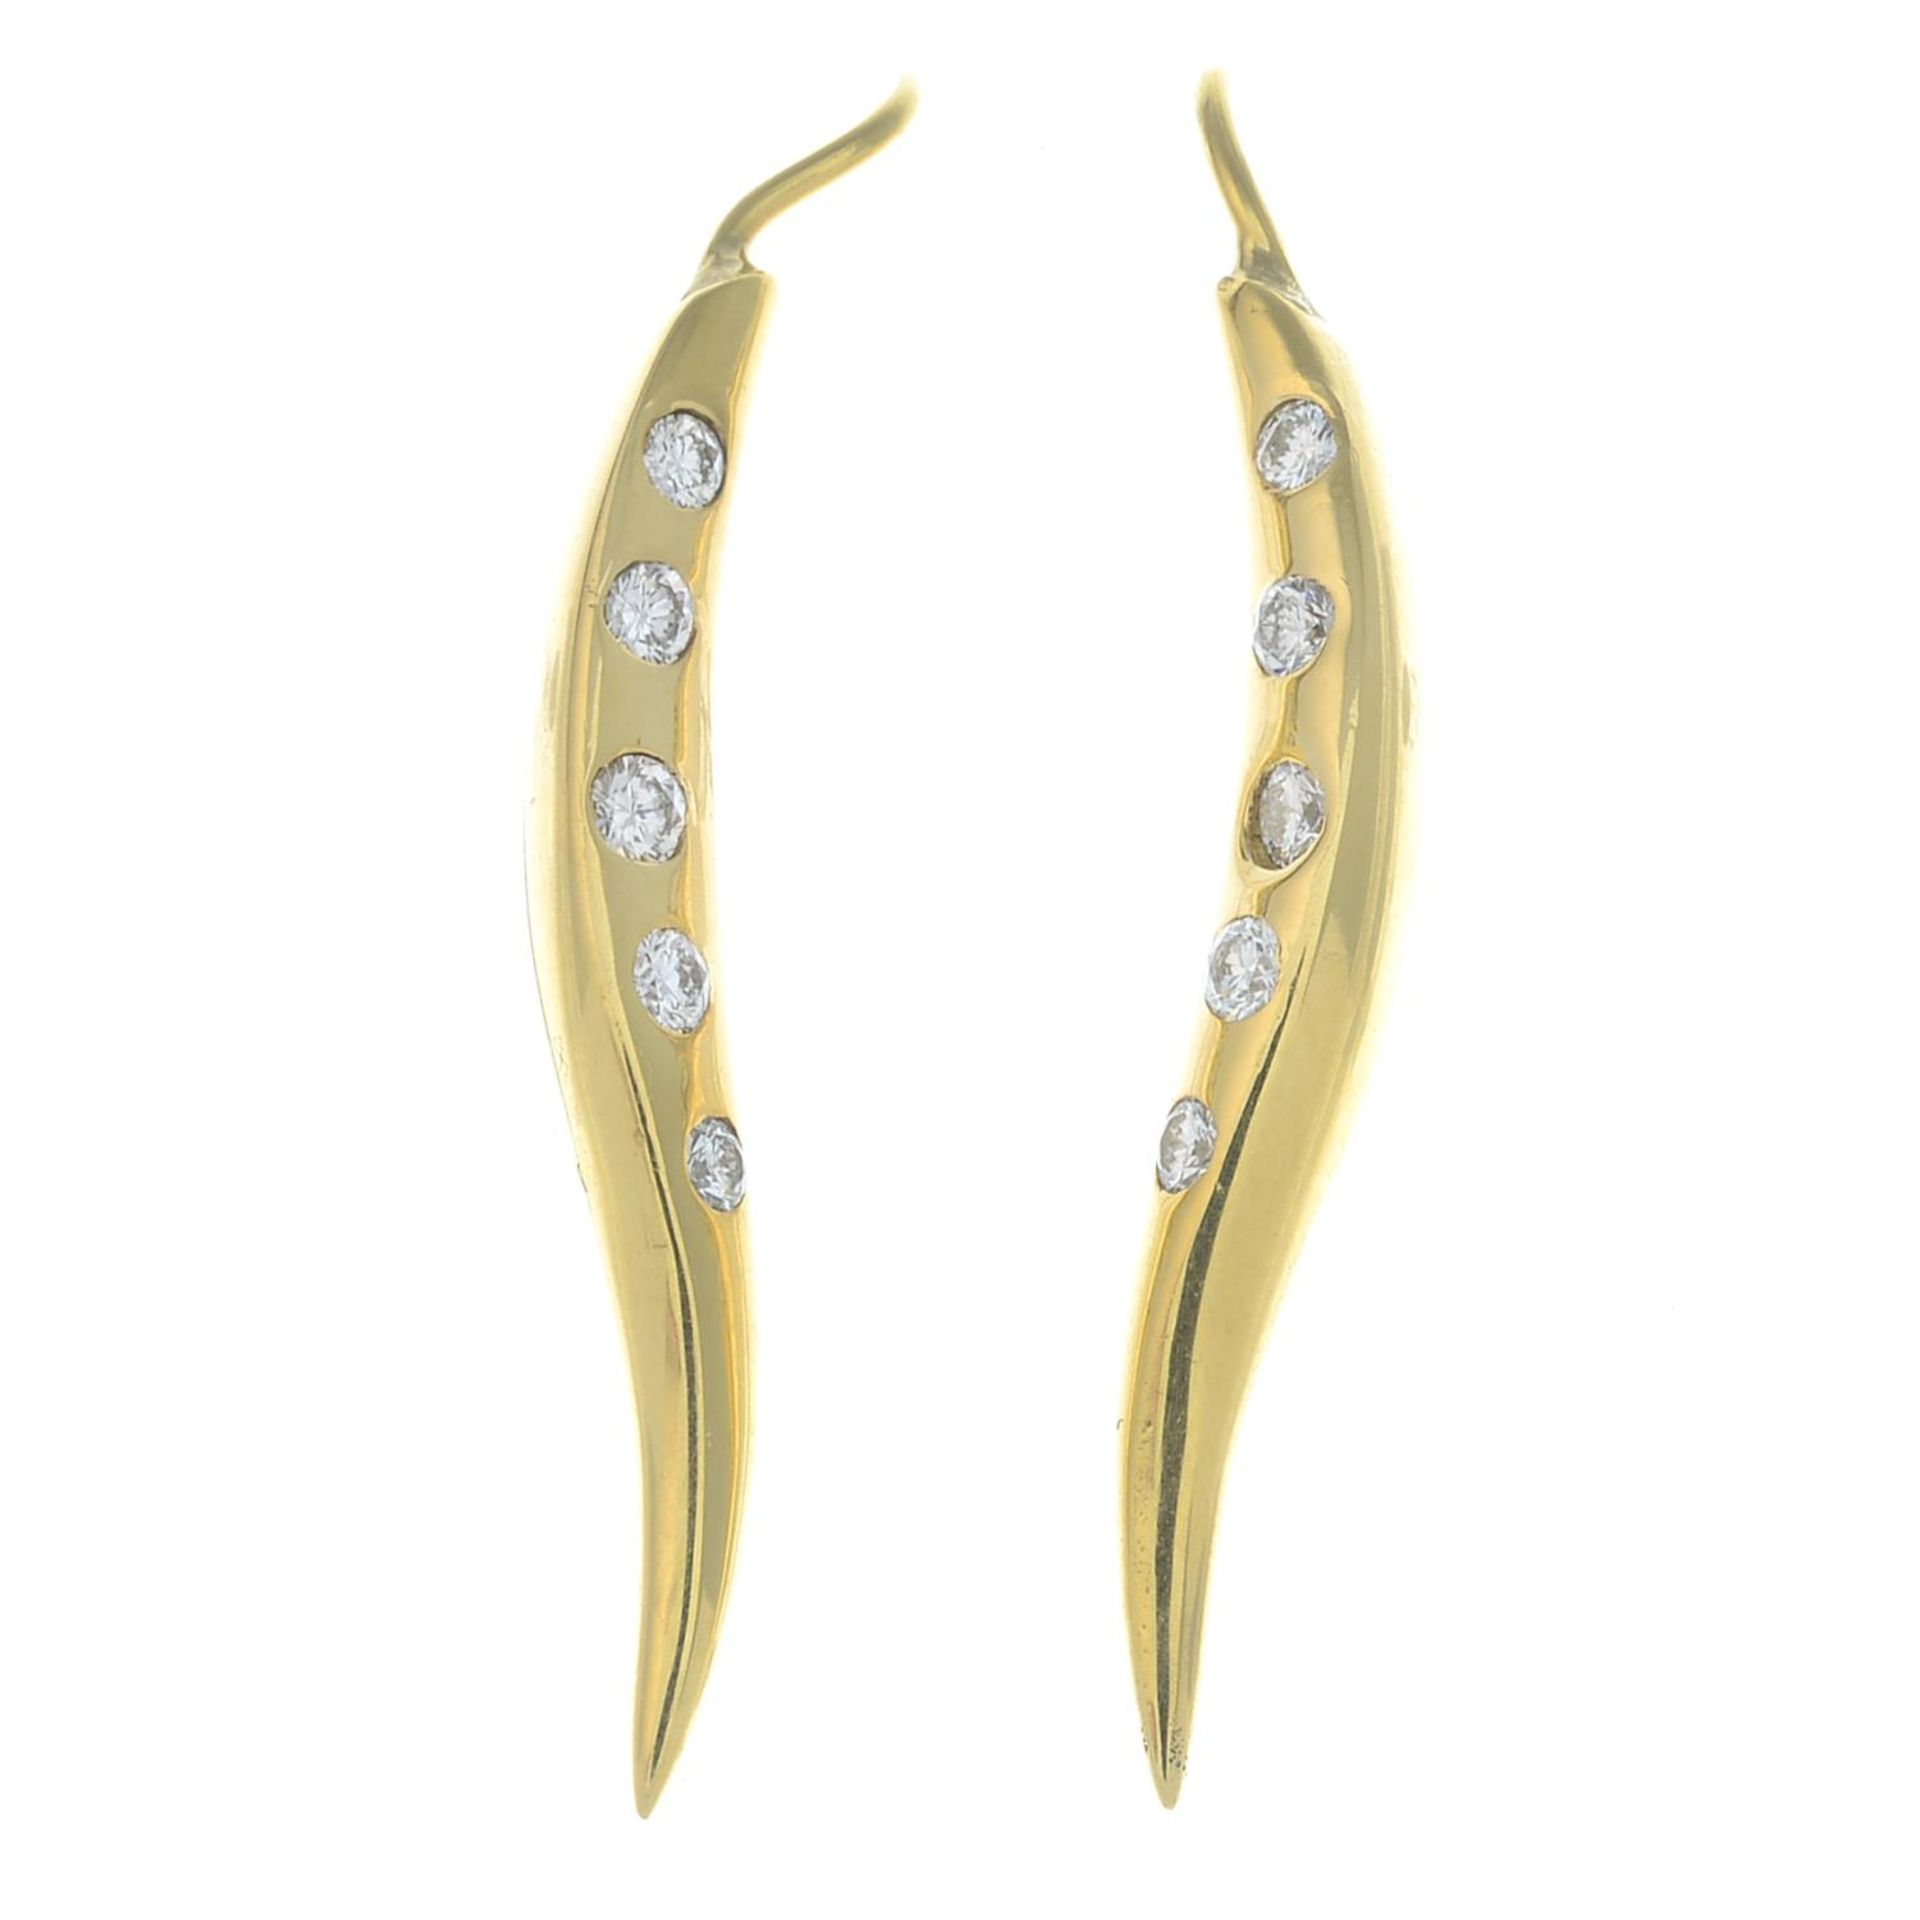 A pair of 18ct gold brilliant-cut diamond curved earrings.Estimated total diamond weight